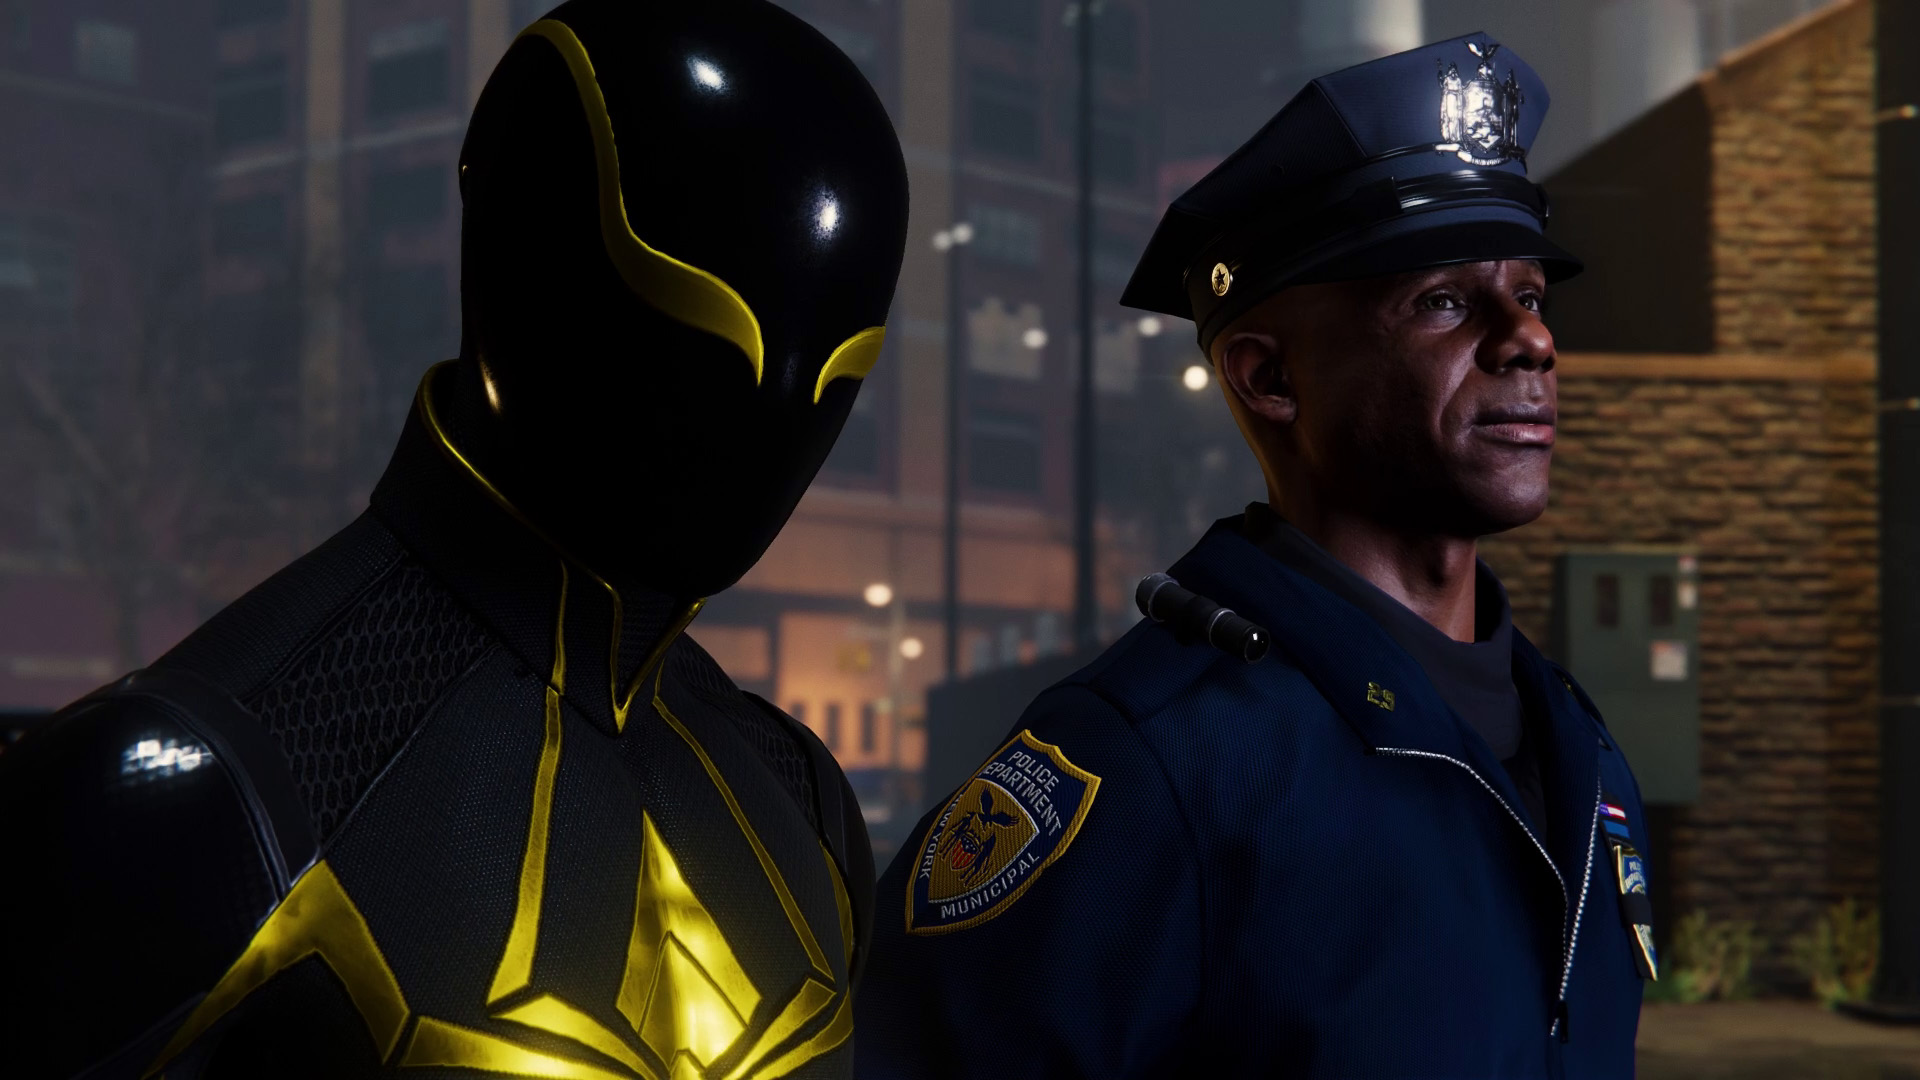 Spider-Man PS4 Police